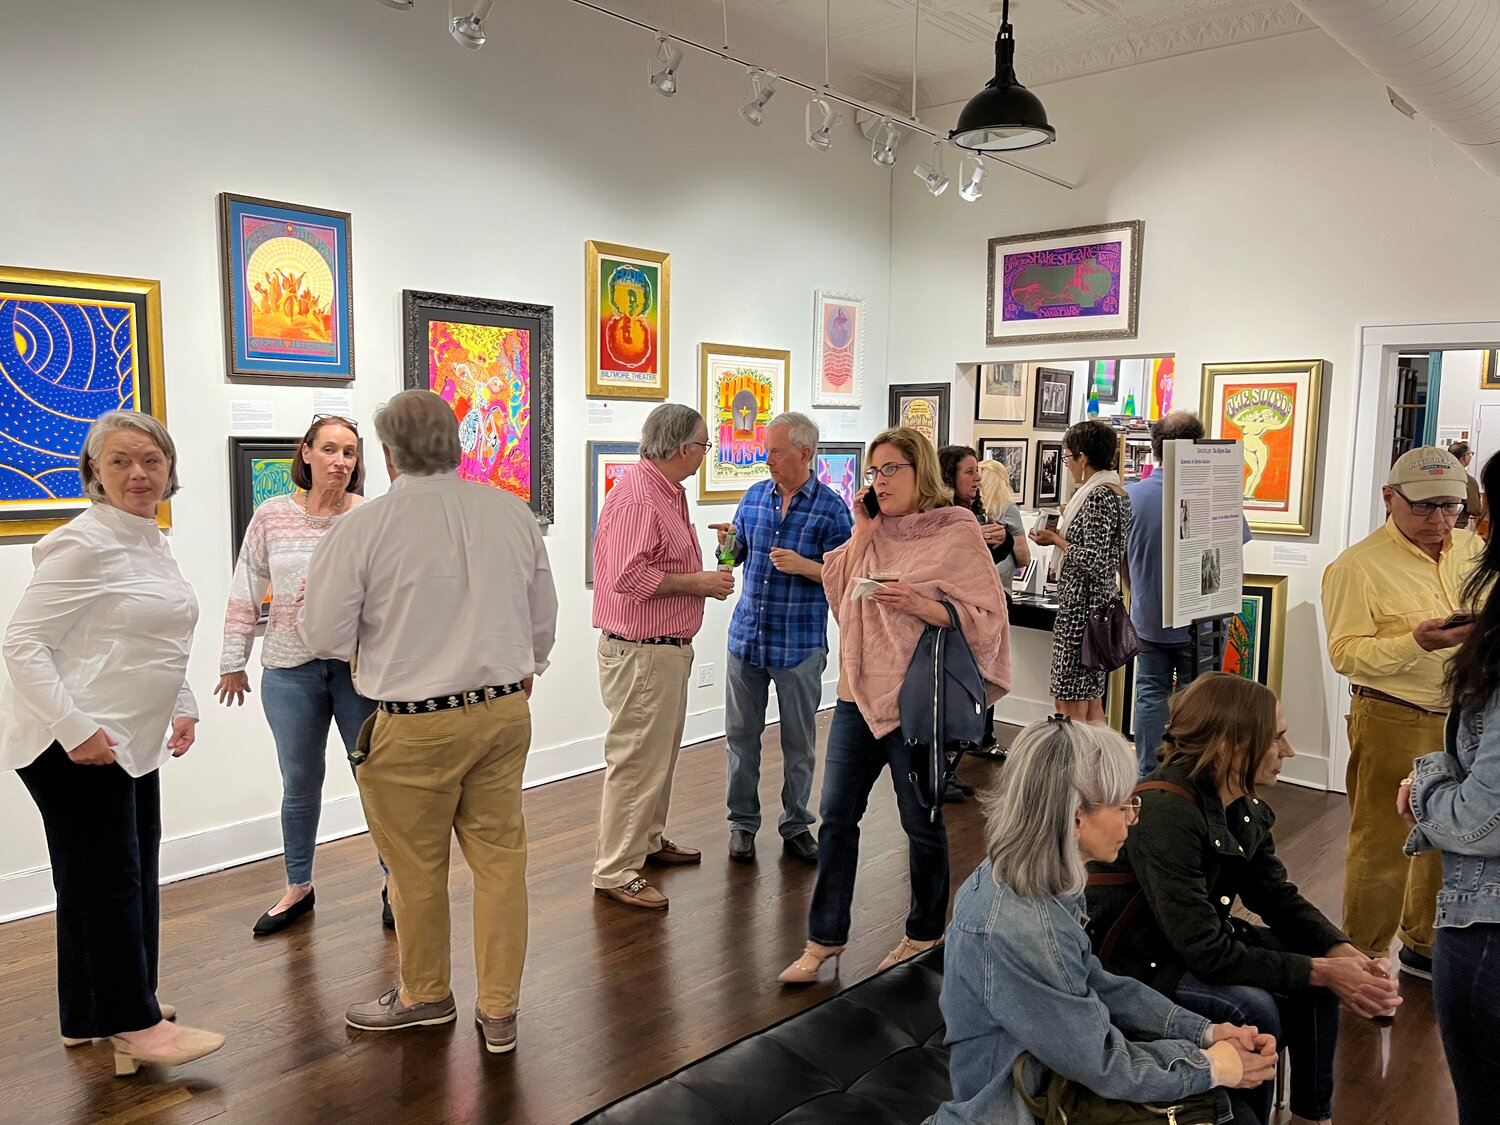 Roughly 100 people from across Long Island and the East Coast made their way to the Bahr Gallery for the exhibition opening on April 14.